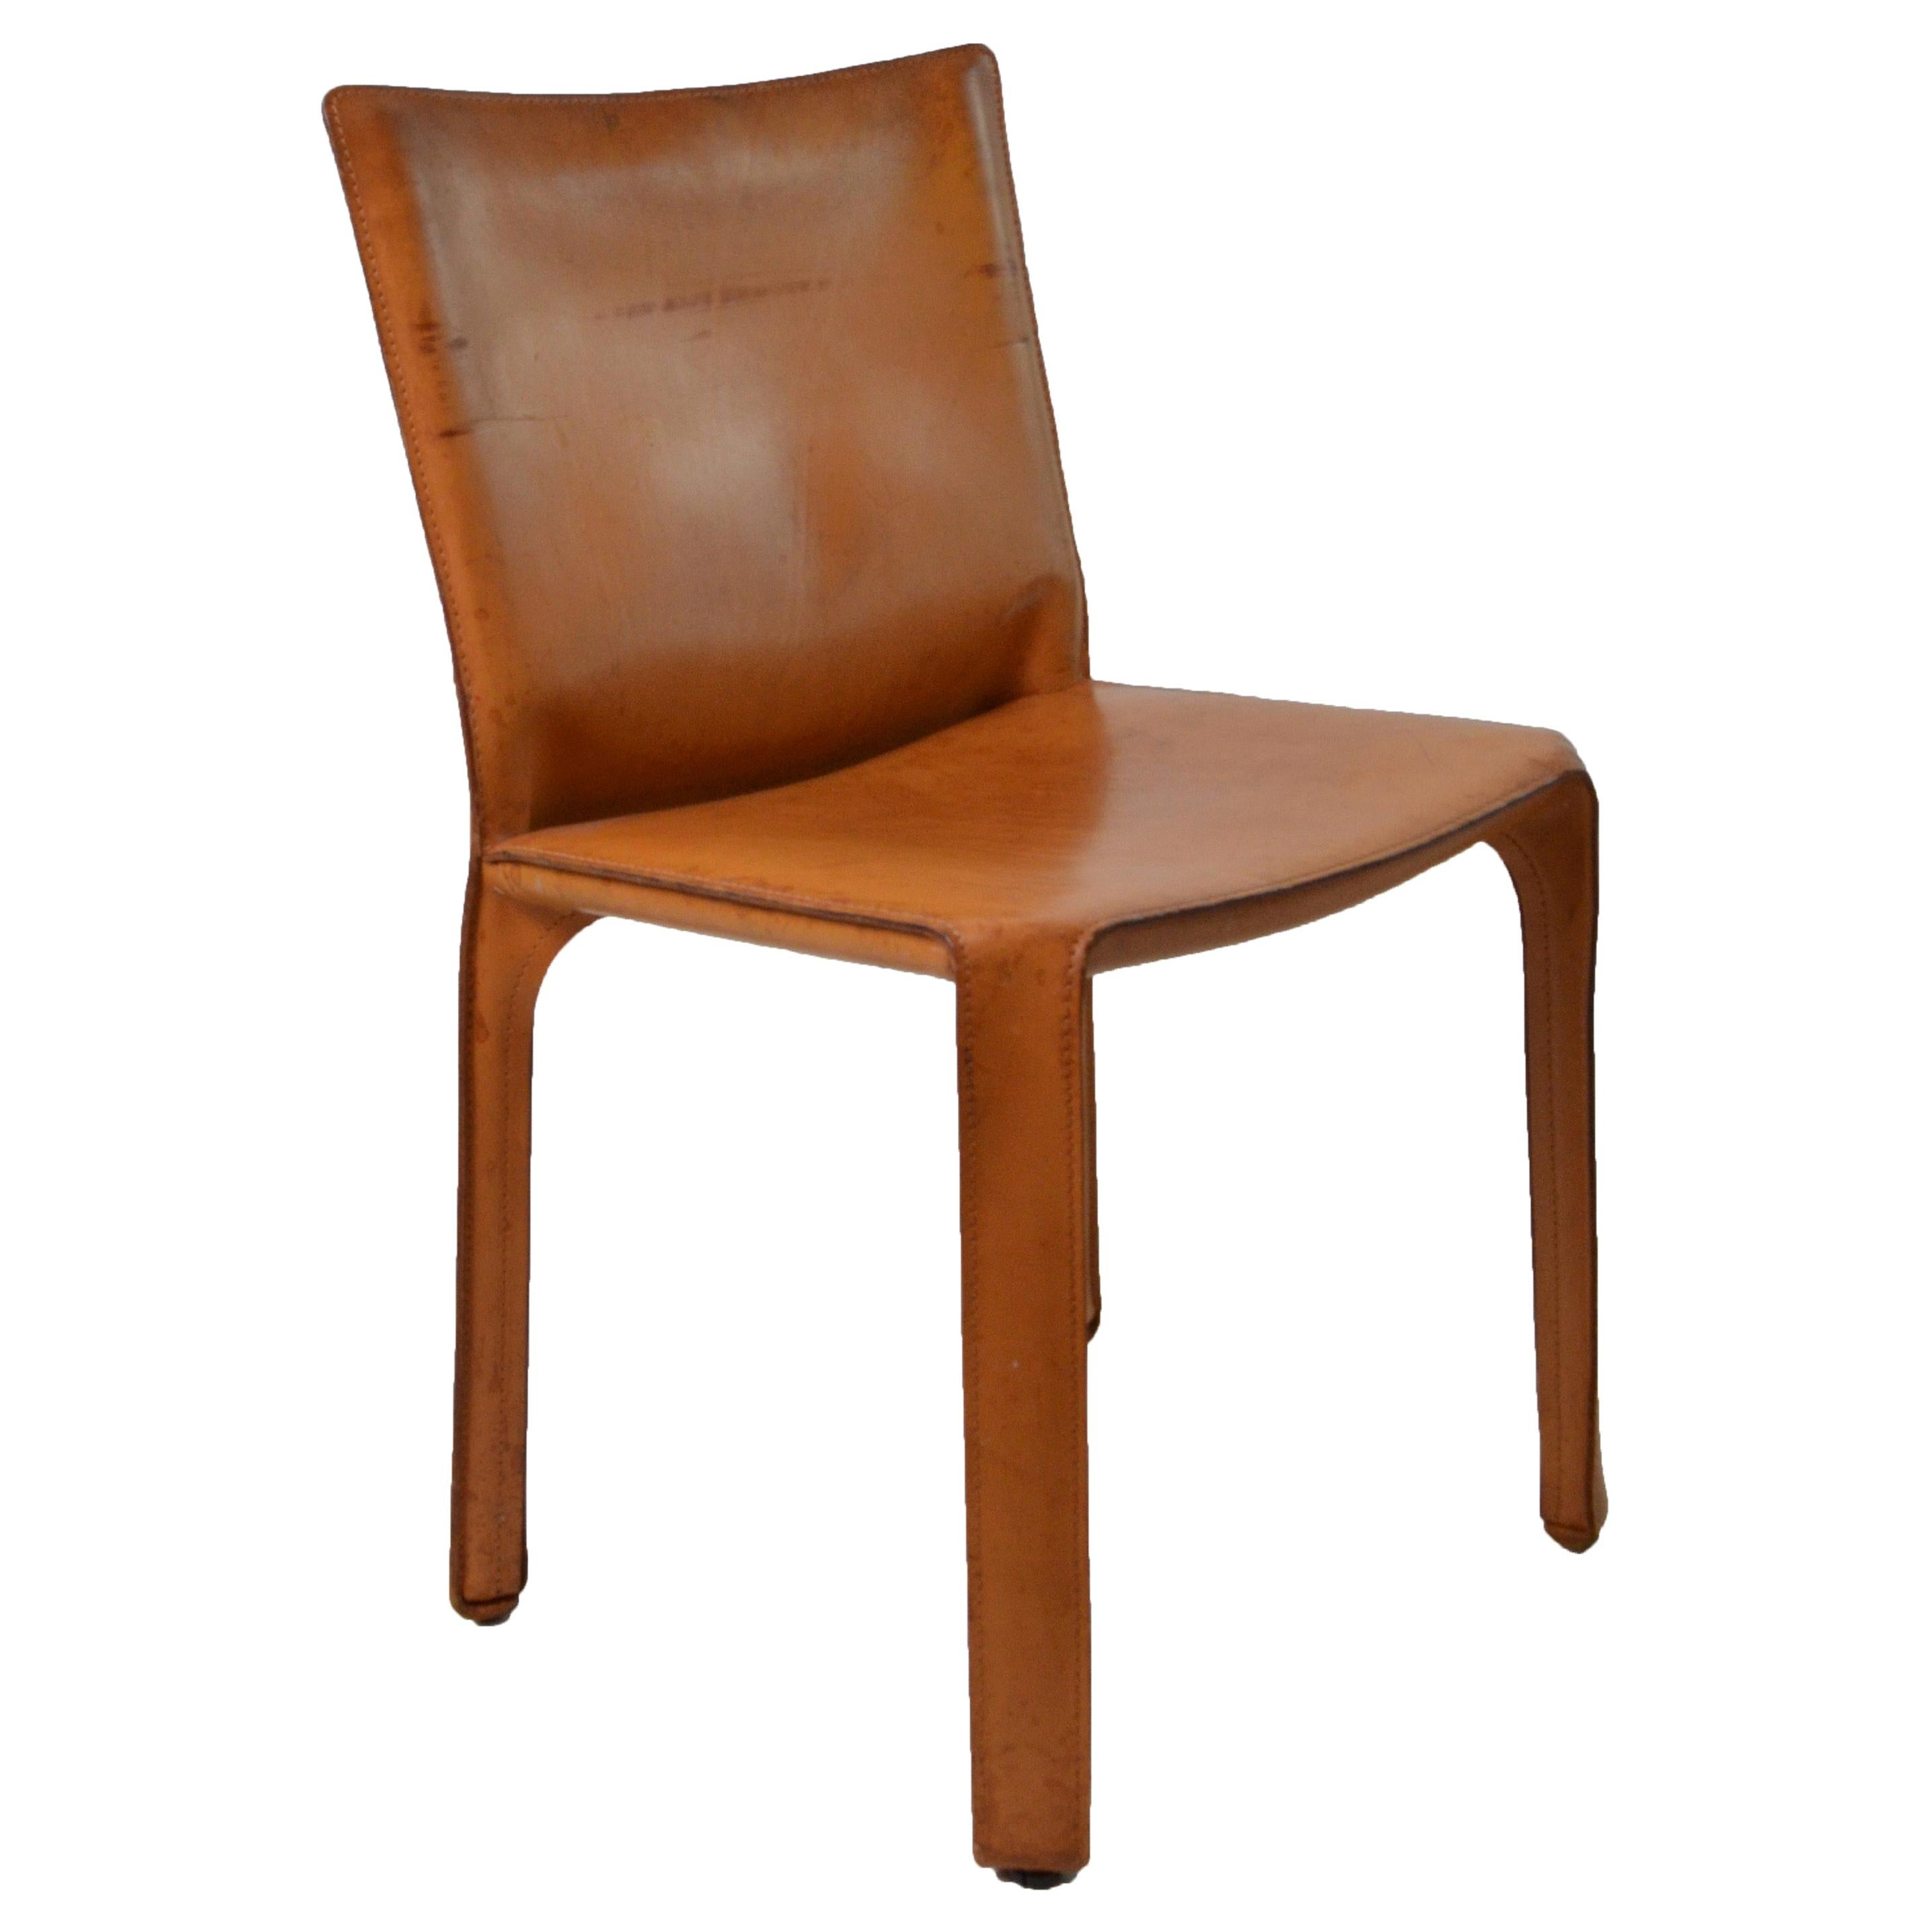 Mario Bellini for Cassina Cab 412 Leather Chairs, Set of 8